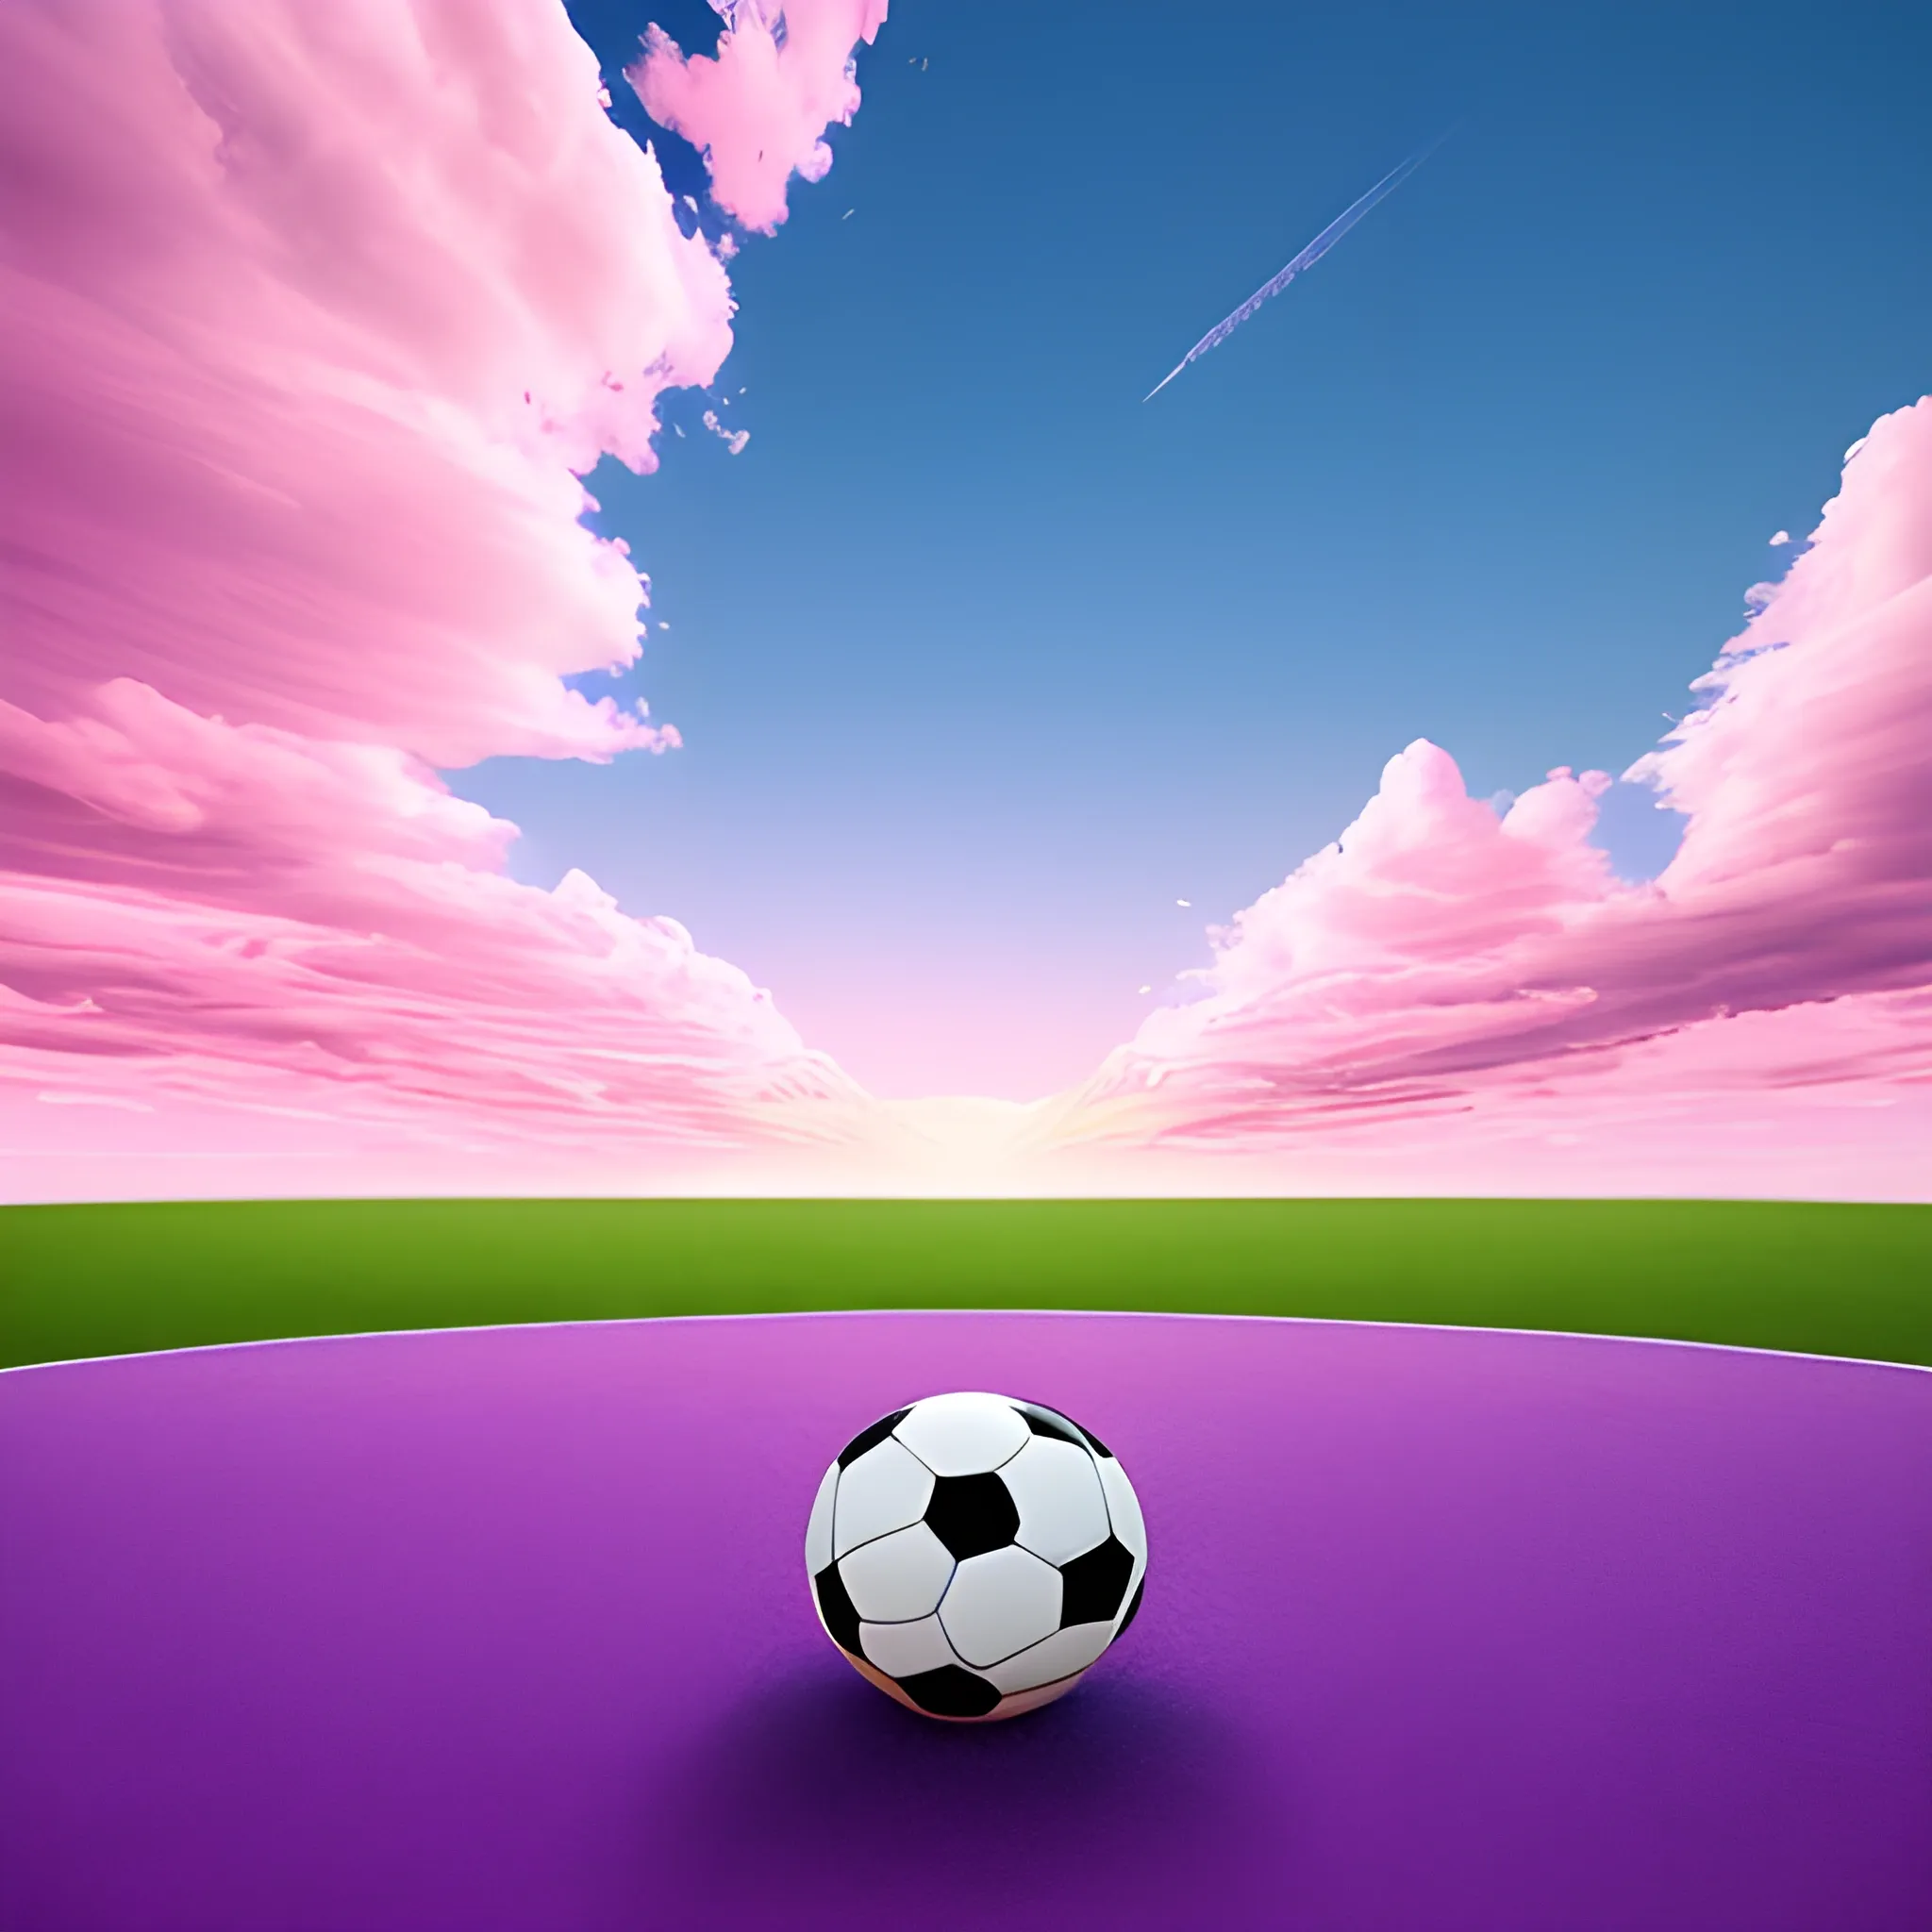 Create a beautiful landscape with big sky view, pink and blue sky, clouds with soccer ball form, Cartoon, 3D